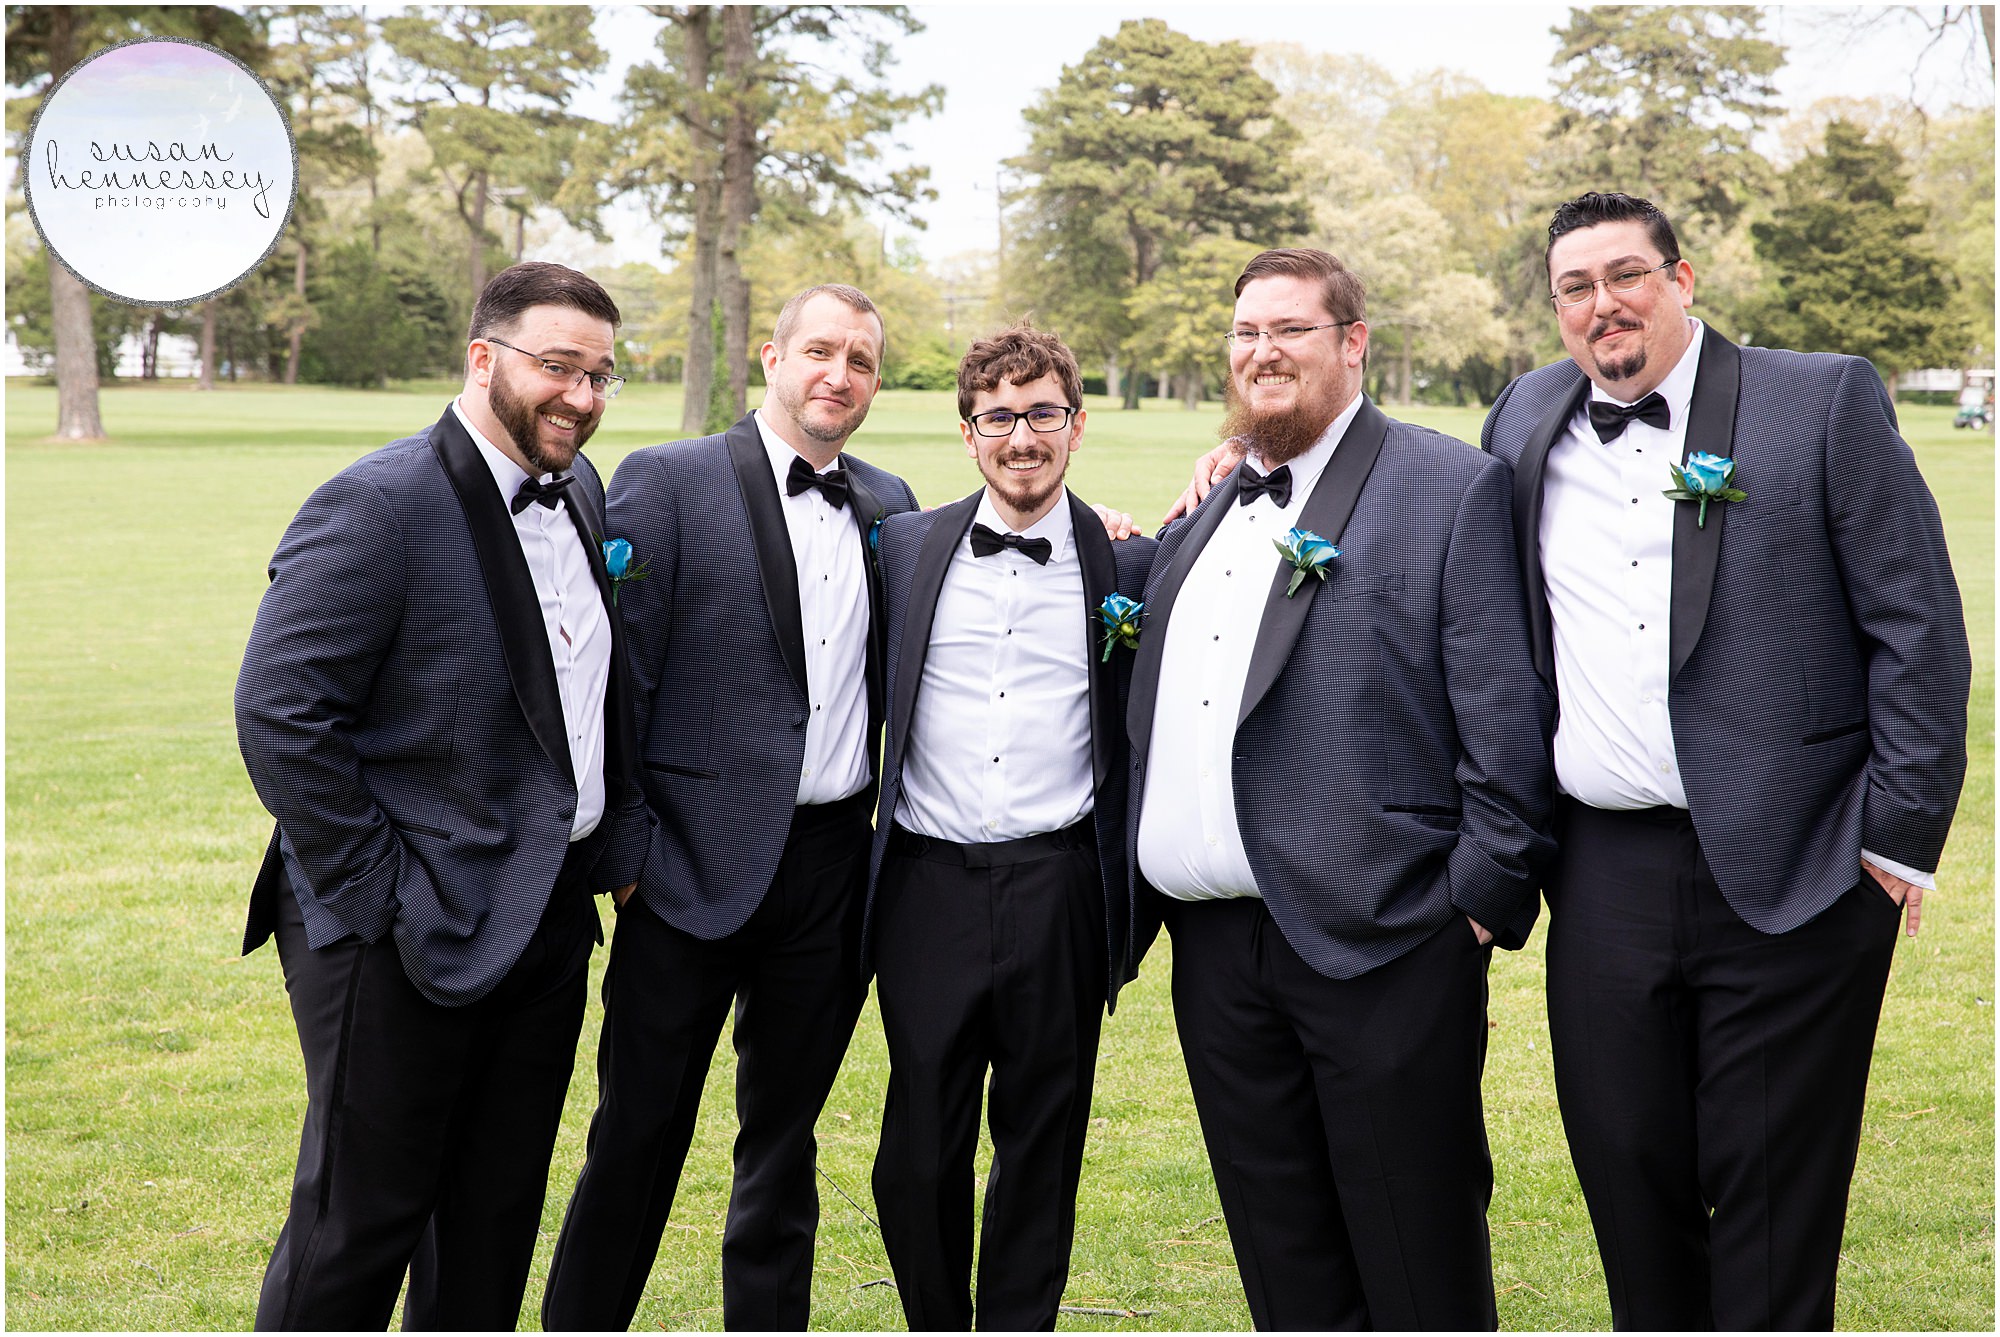 Groom and groomsmen portraits at Greate Bay Country Club